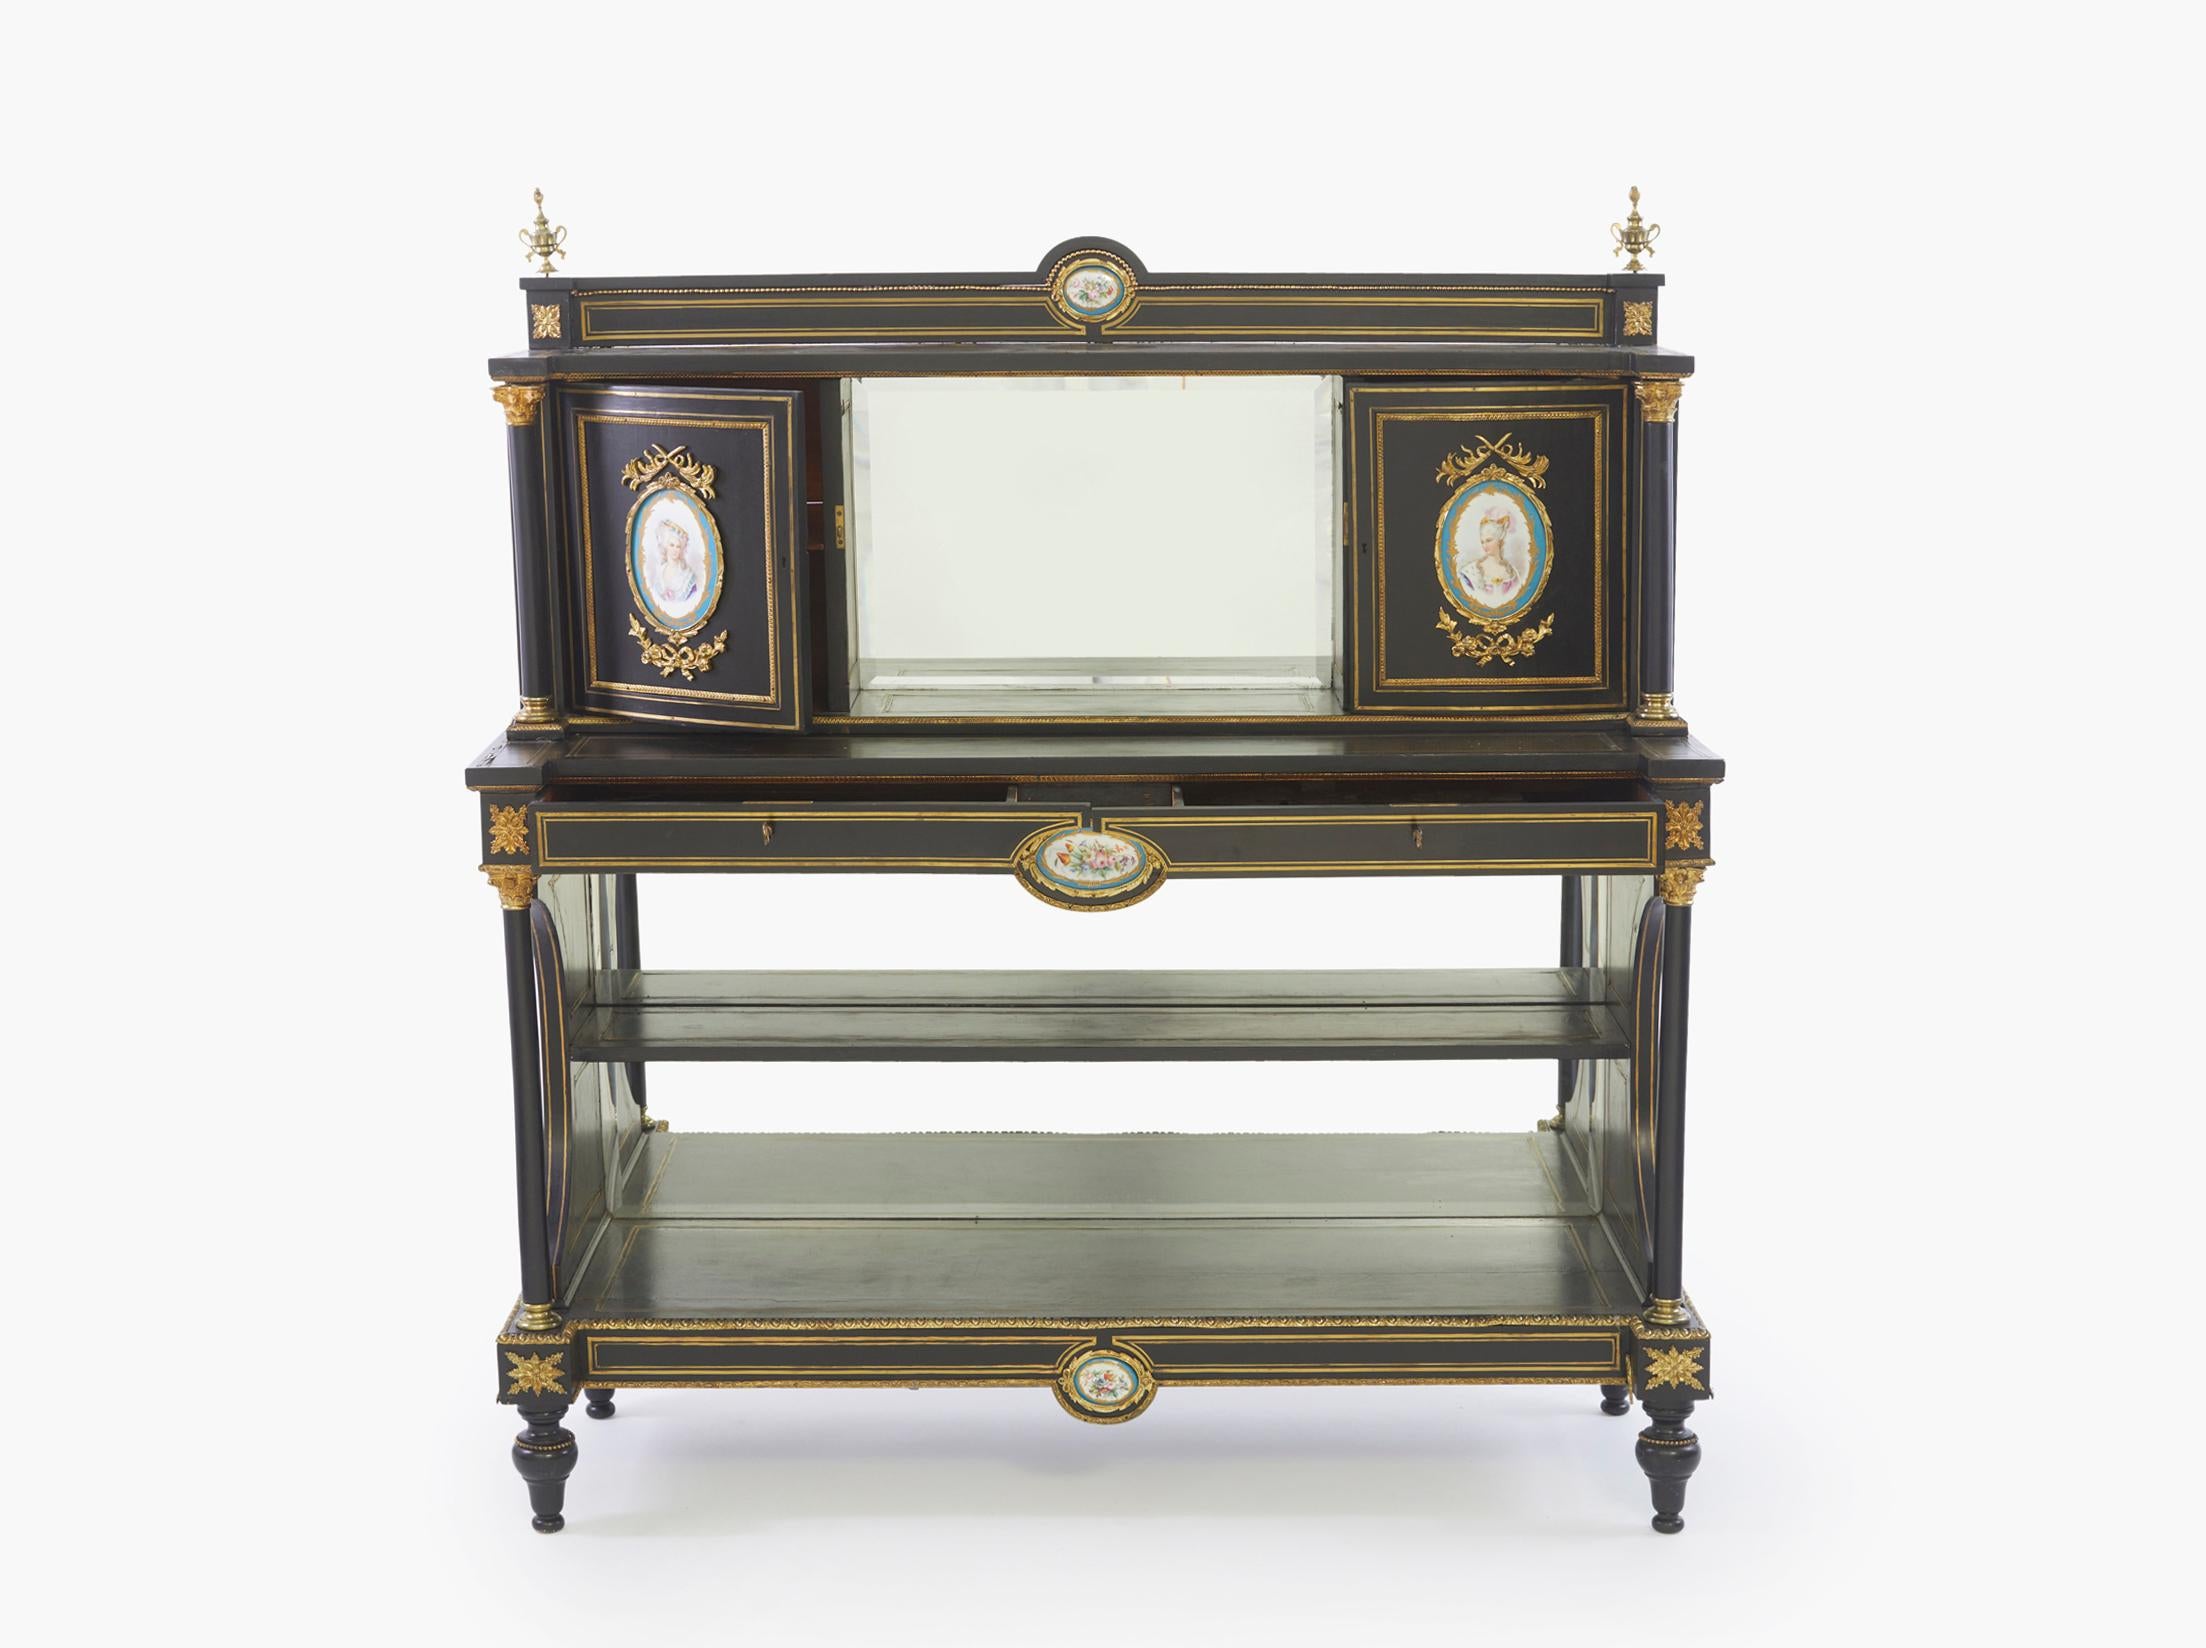 Mid 19th century Louis XVI style black painted wood carved gilt sideboard of elongated rectangular shape, with centered mirrored back flanked by two porcelain portrait plaques in a gilt acanthus cartouche with foliate floral details. The sideboard /